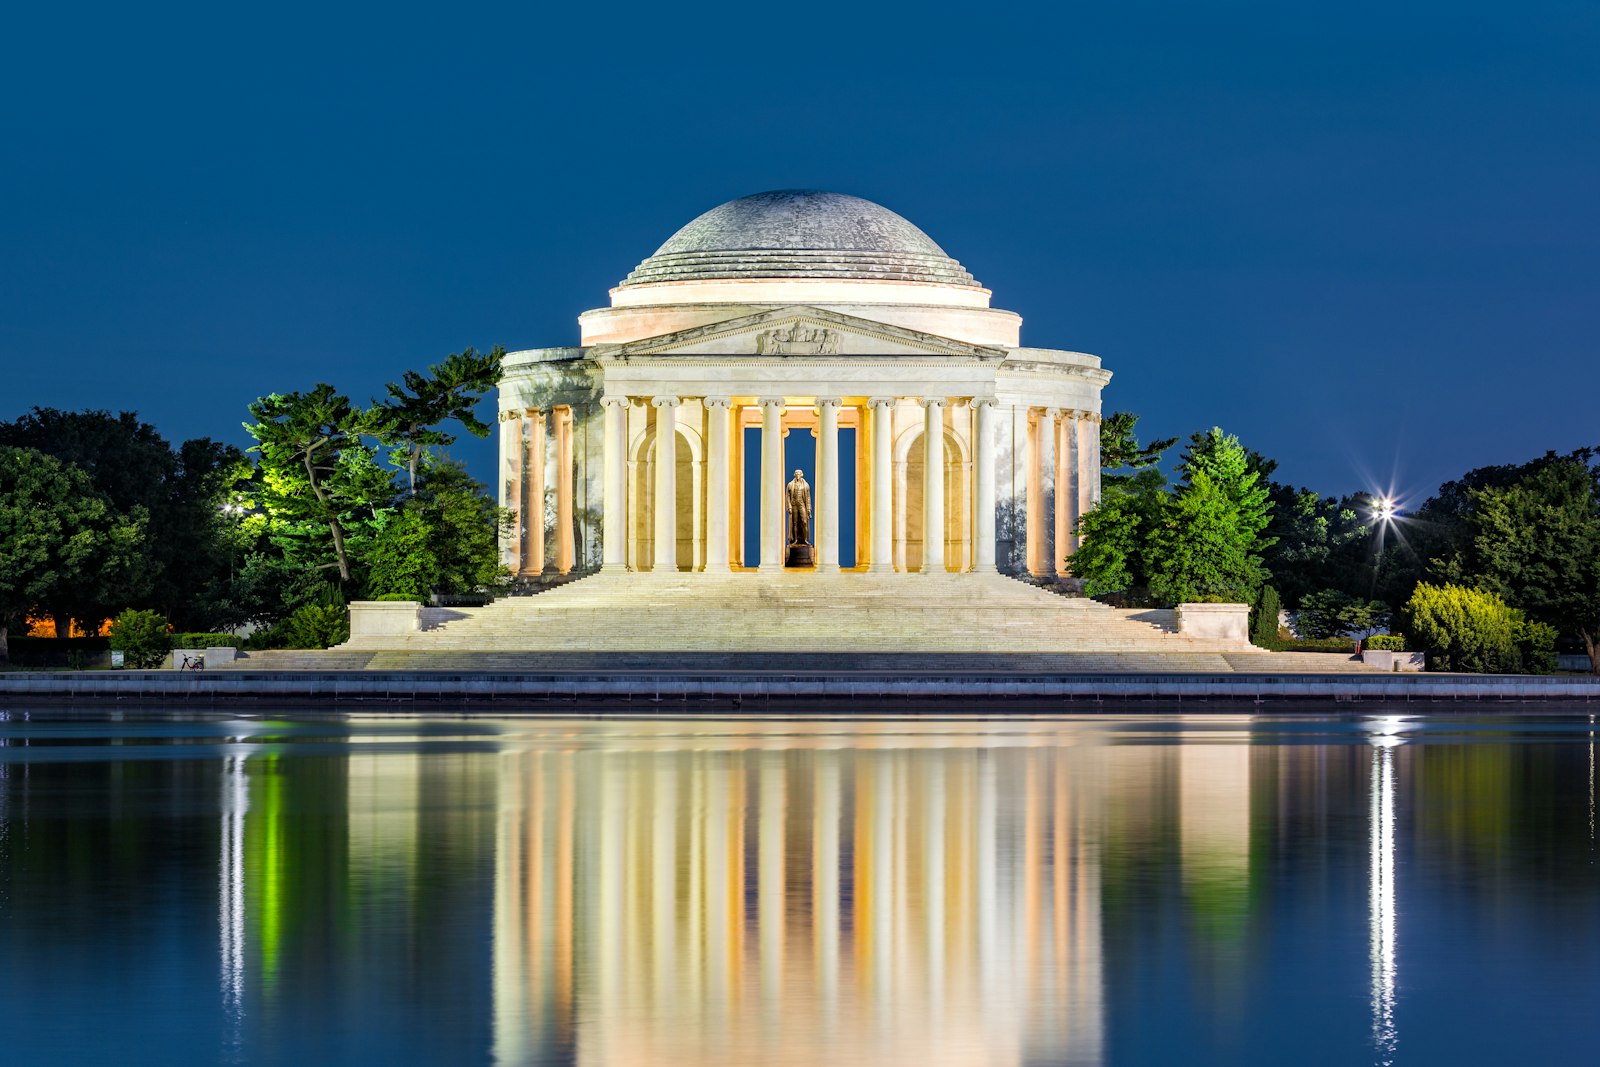 At night, a reflection of the Jefferson Memorial, illuminated, on still water